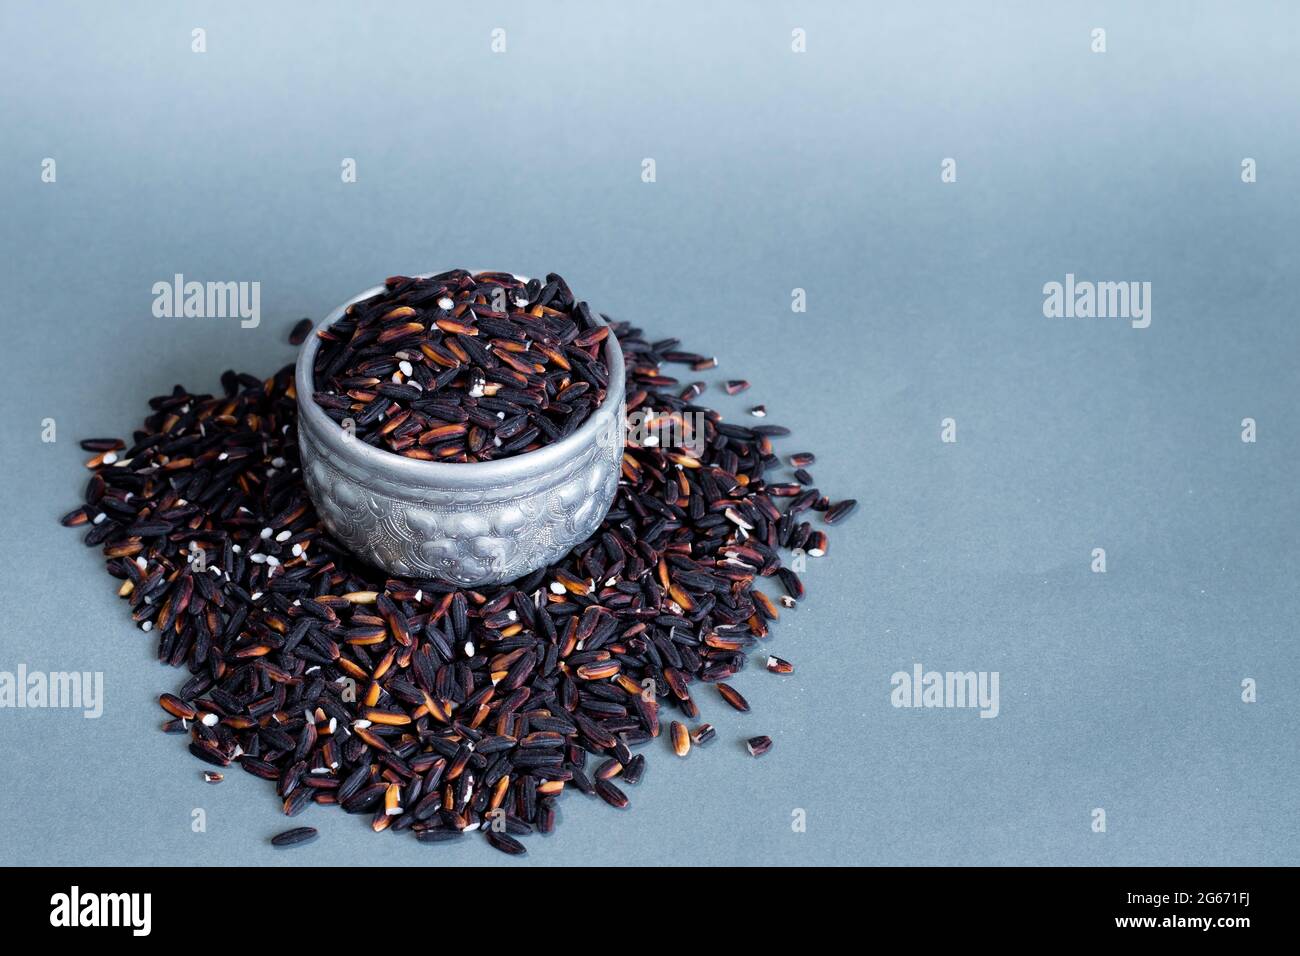 Black rice in a silver container on a gray background. Copy space. Stock Photo